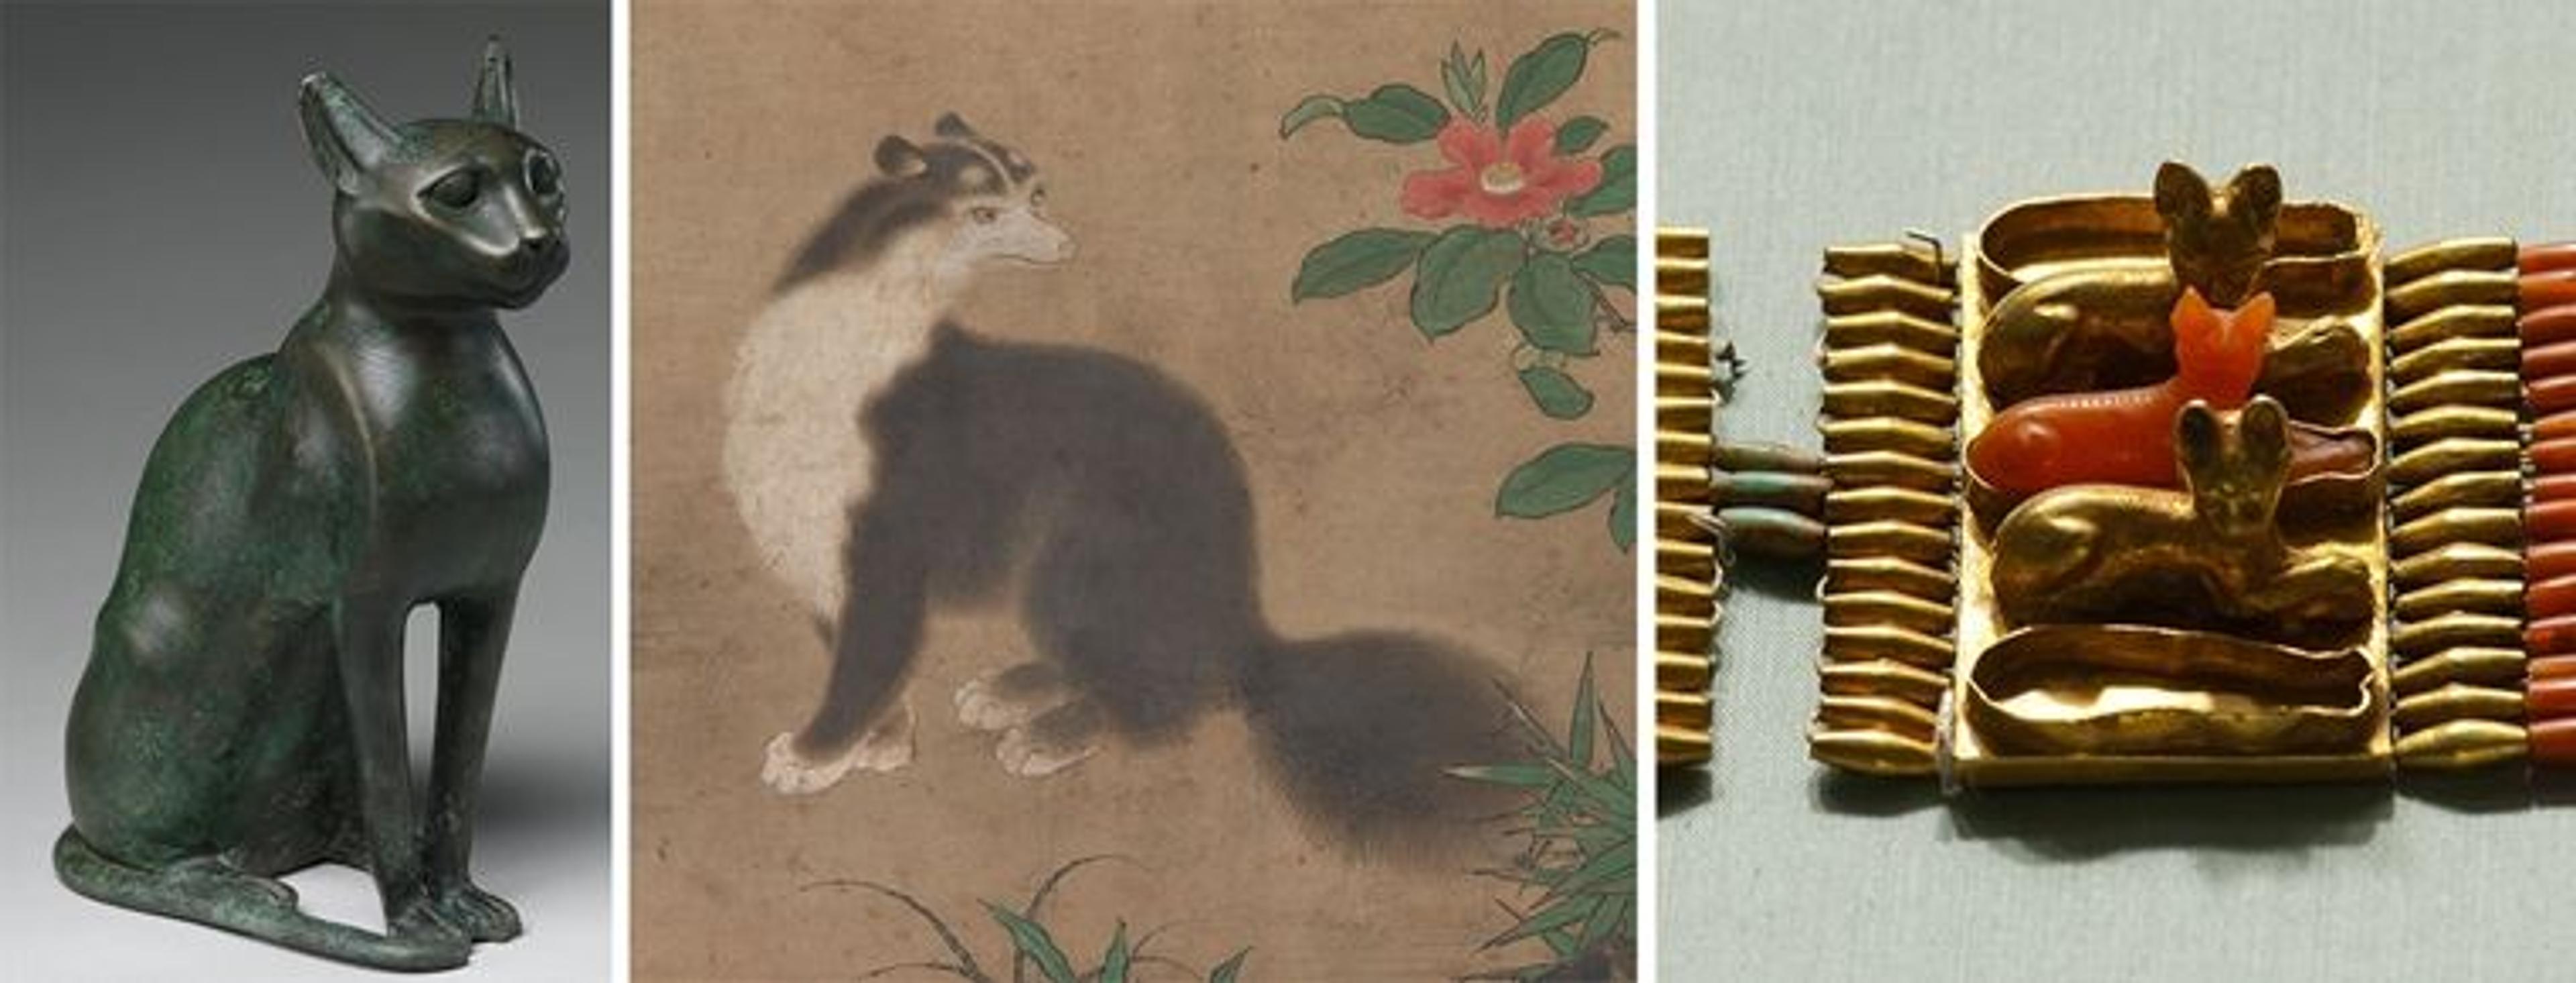 Three artworks in a grid, each depicting cats. Left: an Egyptian sculpture of a cat. Center: a Japanese scroll painting of a cat: Right: a gold-beaded bracelet with cat sculptures on it.